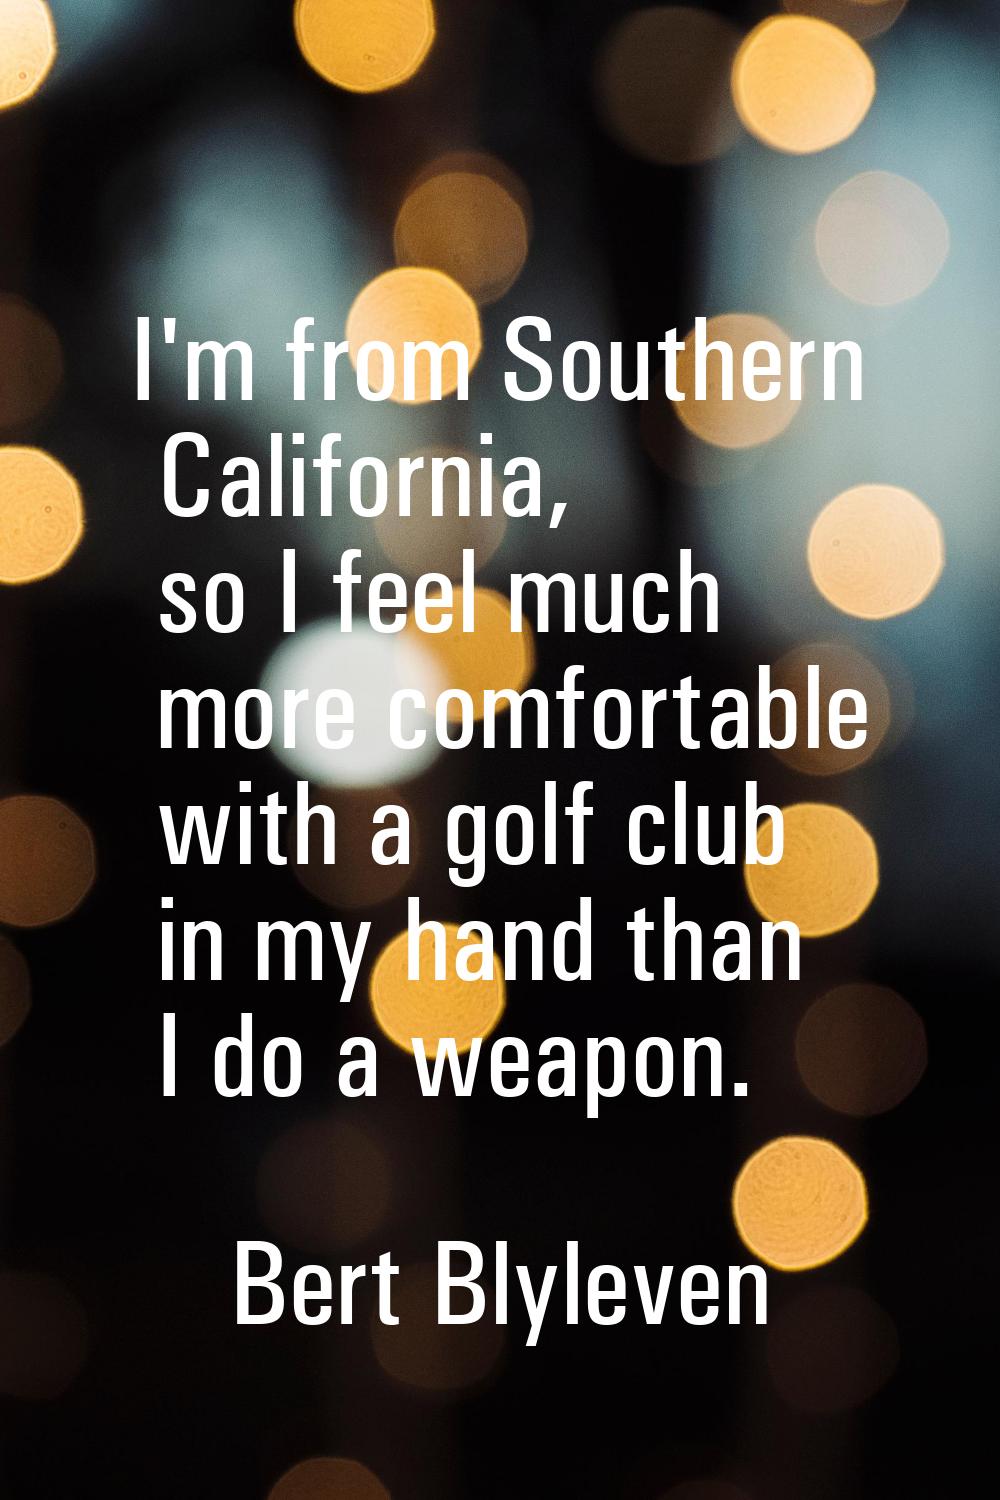 I'm from Southern California, so I feel much more comfortable with a golf club in my hand than I do